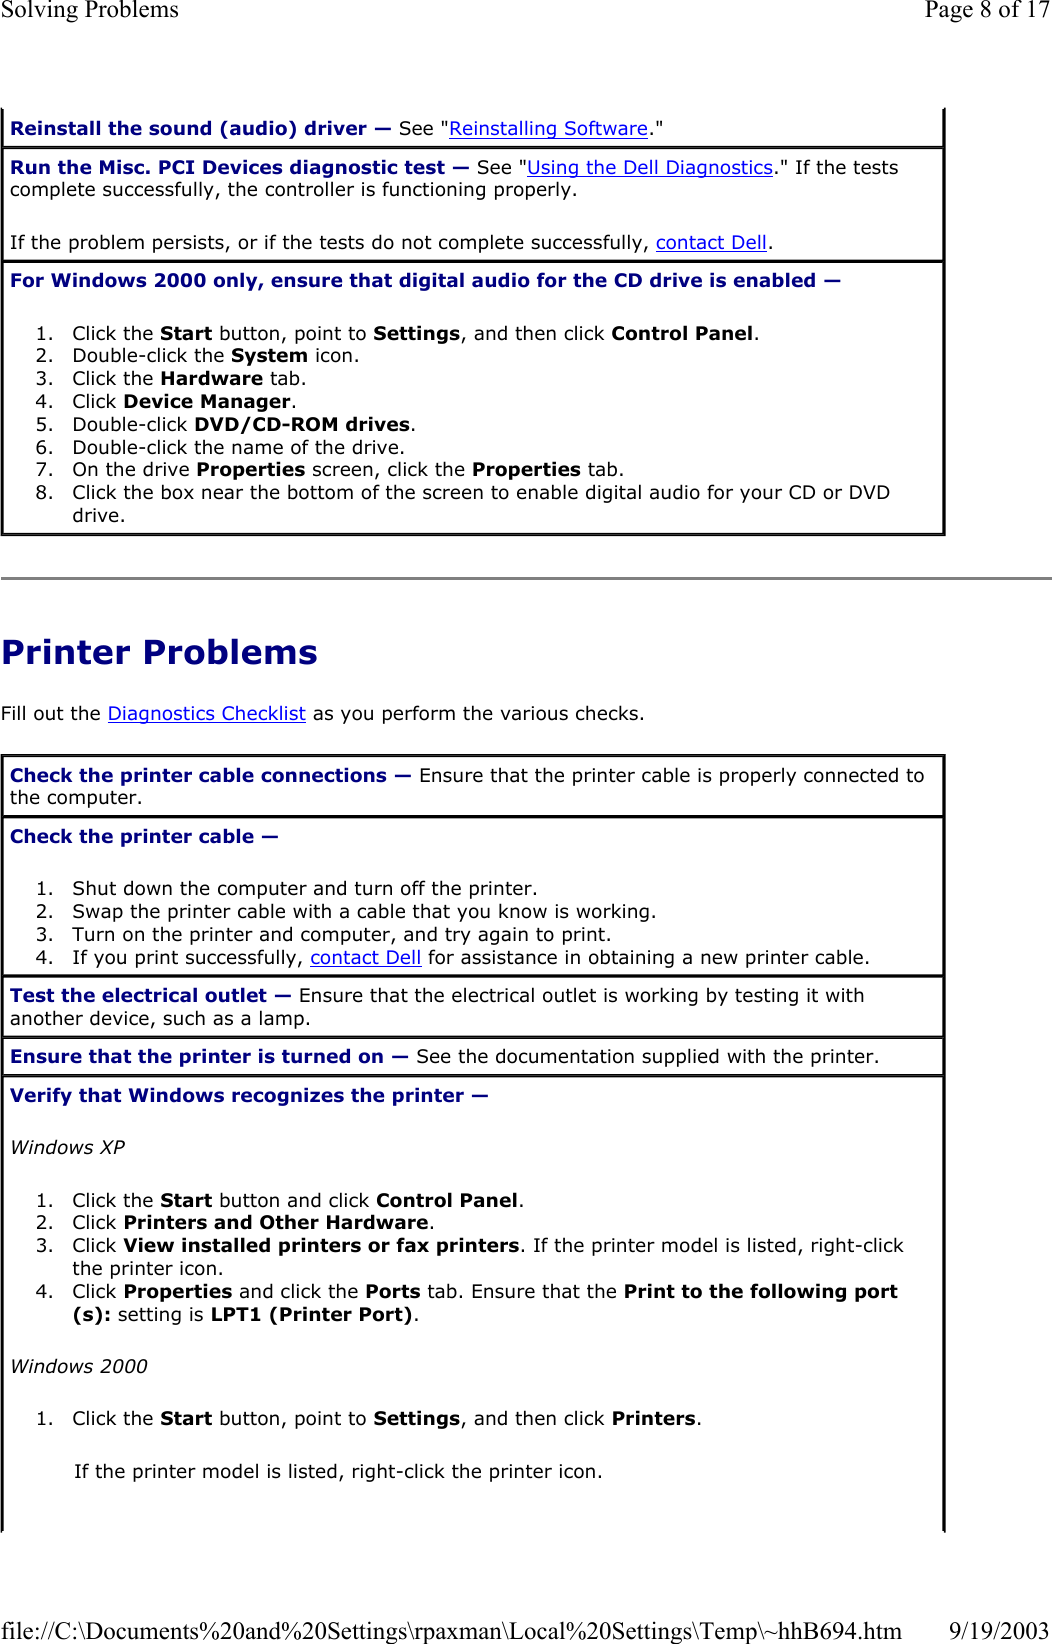 Printer Problems Fill out the Diagnostics Checklist as you perform the various checks. Reinstall the sound (audio) driver — See &quot;Reinstalling Software.&quot; Run the Misc. PCI Devices diagnostic test — See &quot;Using the Dell Diagnostics.&quot; If the tests complete successfully, the controller is functioning properly. If the problem persists, or if the tests do not complete successfully, contact Dell. For Windows 2000 only, ensure that digital audio for the CD drive is enabled —  1. Click the Start button, point to Settings, and then click Control Panel.  2. Double-click the System icon.  3. Click the Hardware tab.  4. Click Device Manager.  5. Double-click DVD/CD-ROM drives.  6. Double-click the name of the drive.  7. On the drive Properties screen, click the Properties tab.  8. Click the box near the bottom of the screen to enable digital audio for your CD or DVD drive.  Check the printer cable connections — Ensure that the printer cable is properly connected to the computer. Check the printer cable —  1. Shut down the computer and turn off the printer.  2. Swap the printer cable with a cable that you know is working.  3. Turn on the printer and computer, and try again to print.  4. If you print successfully, contact Dell for assistance in obtaining a new printer cable.  Test the electrical outlet — Ensure that the electrical outlet is working by testing it with another device, such as a lamp. Ensure that the printer is turned on — See the documentation supplied with the printer. Verify that Windows recognizes the printer —  Windows XP 1. Click the Start button and click Control Panel.  2. Click Printers and Other Hardware.  3. Click View installed printers or fax printers. If the printer model is listed, right-click the printer icon.  4. Click Properties and click the Ports tab. Ensure that the Print to the following port(s): setting is LPT1 (Printer Port).  Windows 2000 1. Click the Start button, point to Settings, and then click Printers.  If the printer model is listed, right-click the printer icon. Page 8 of 17Solving Problems9/19/2003file://C:\Documents%20and%20Settings\rpaxman\Local%20Settings\Temp\~hhB694.htm